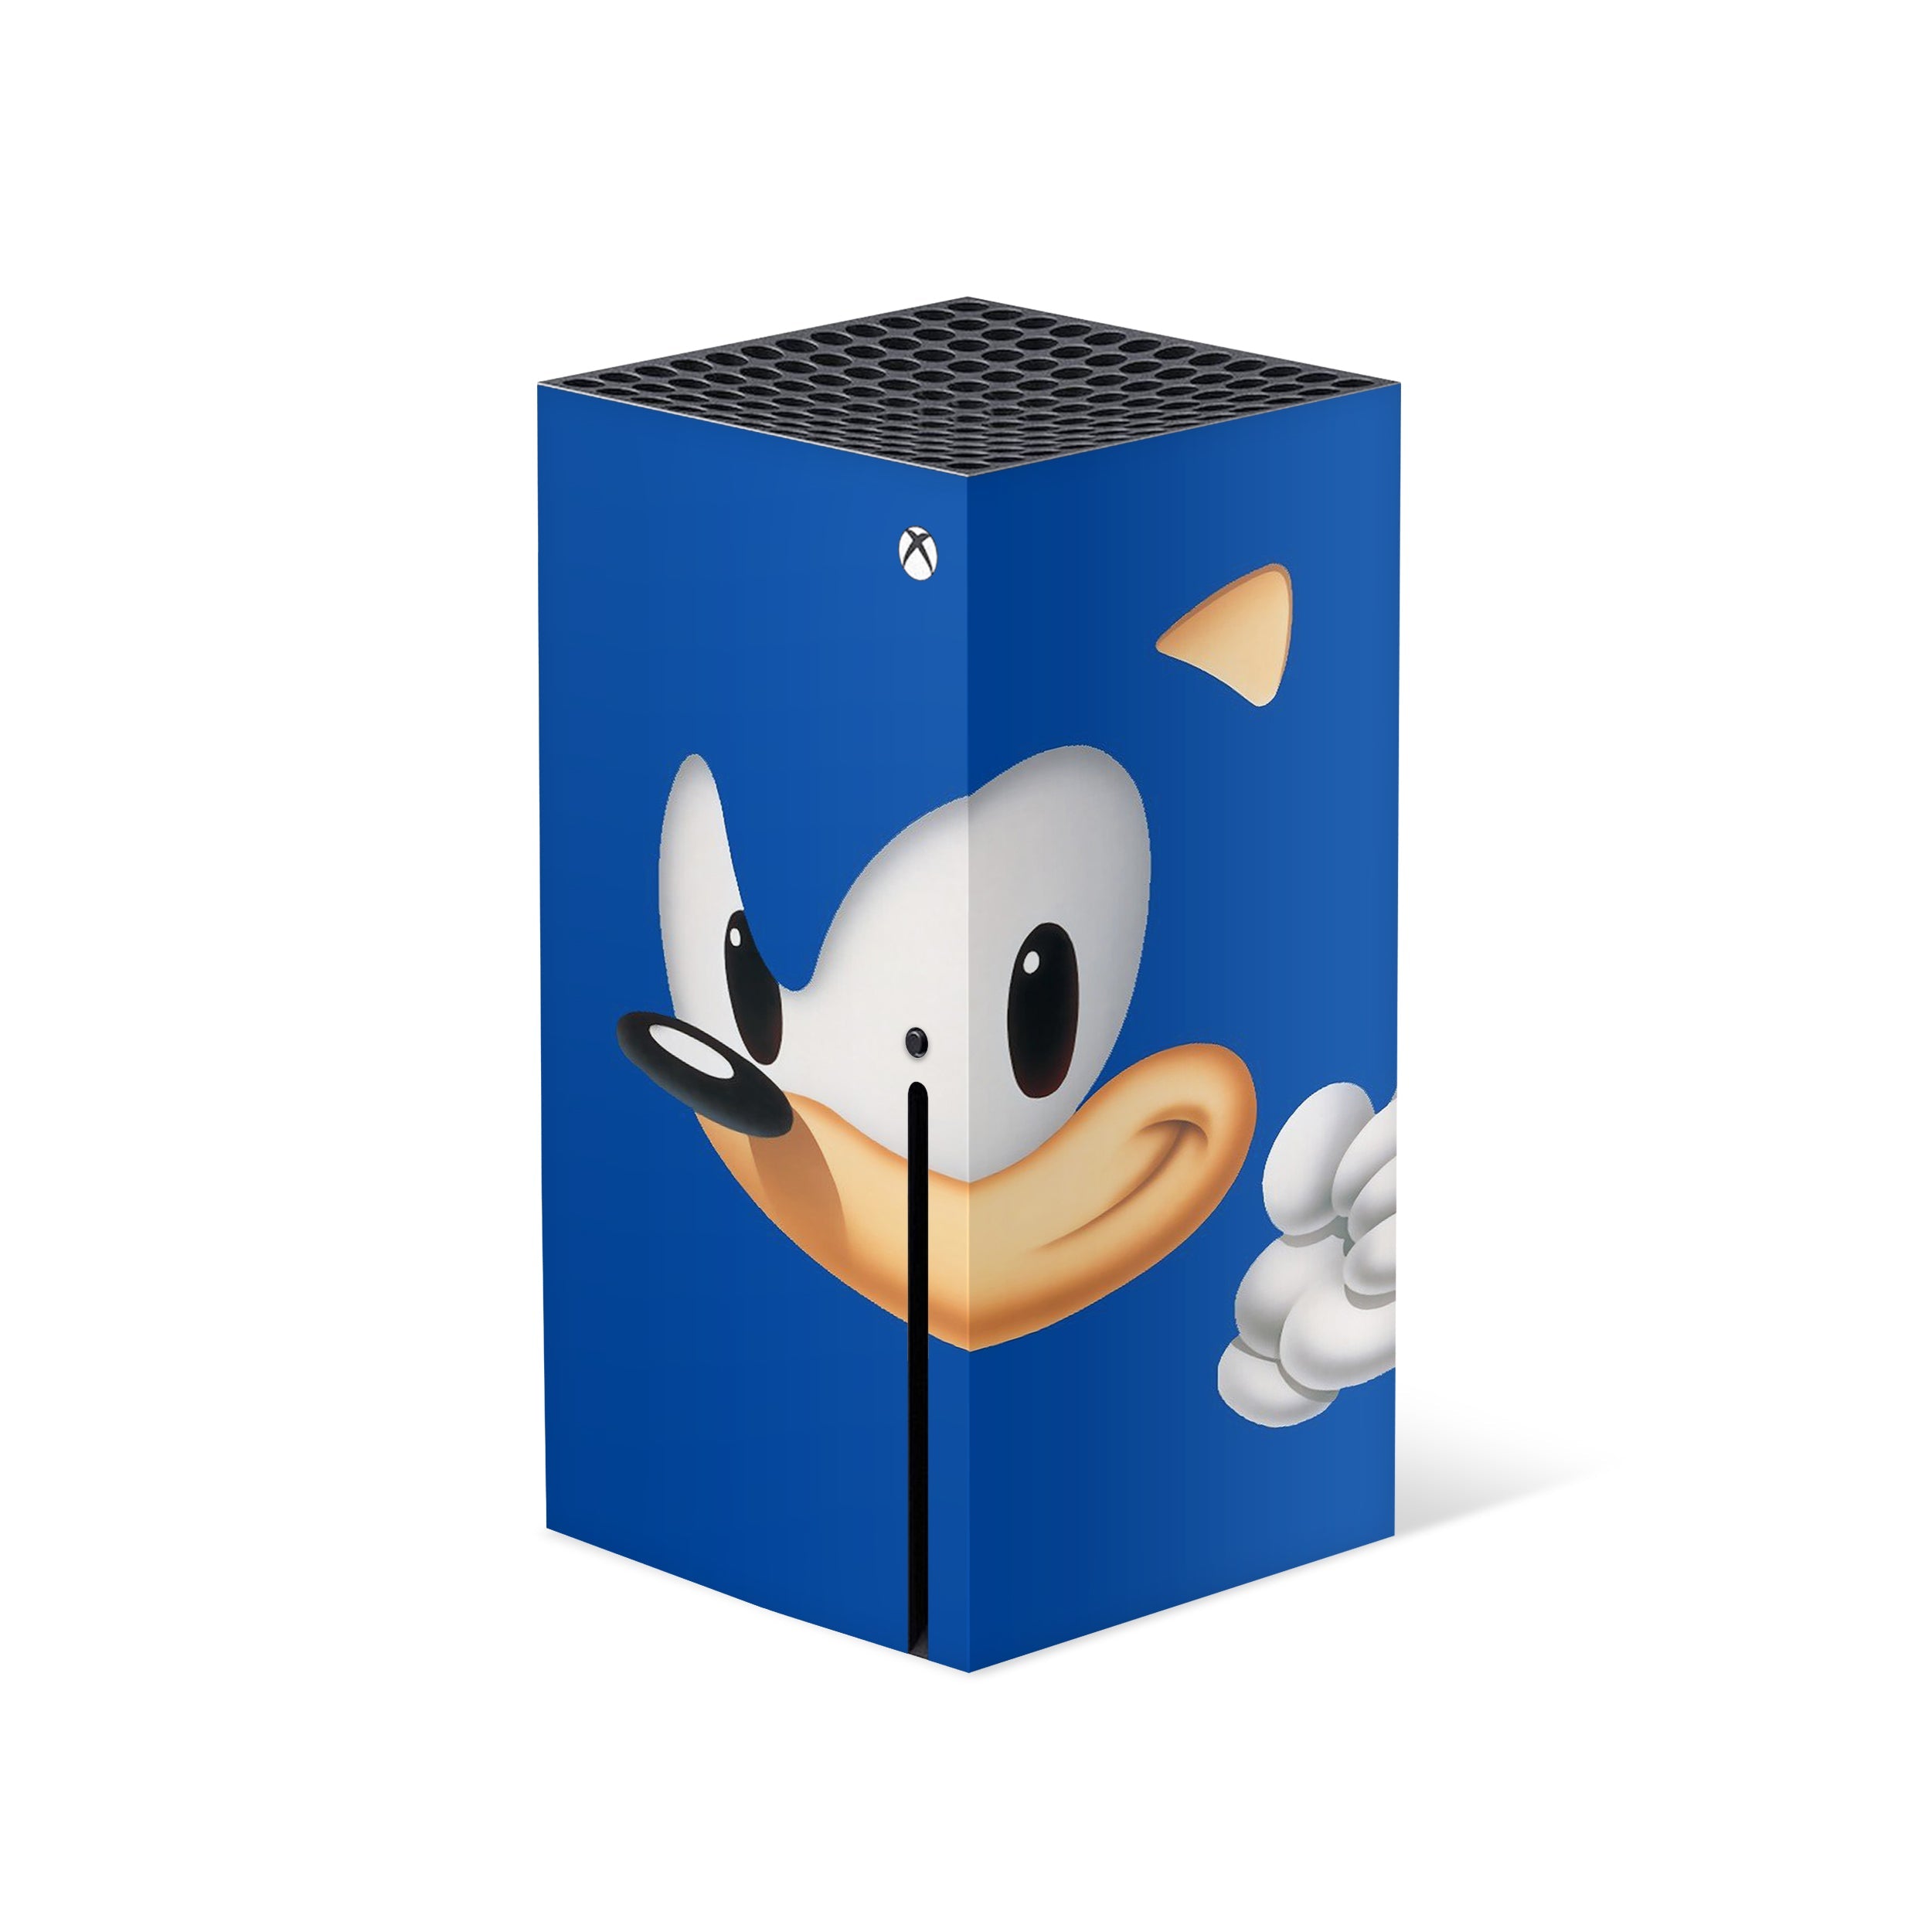 A video game skin featuring a Sonic The Hedgehog design for the Xbox Series X.